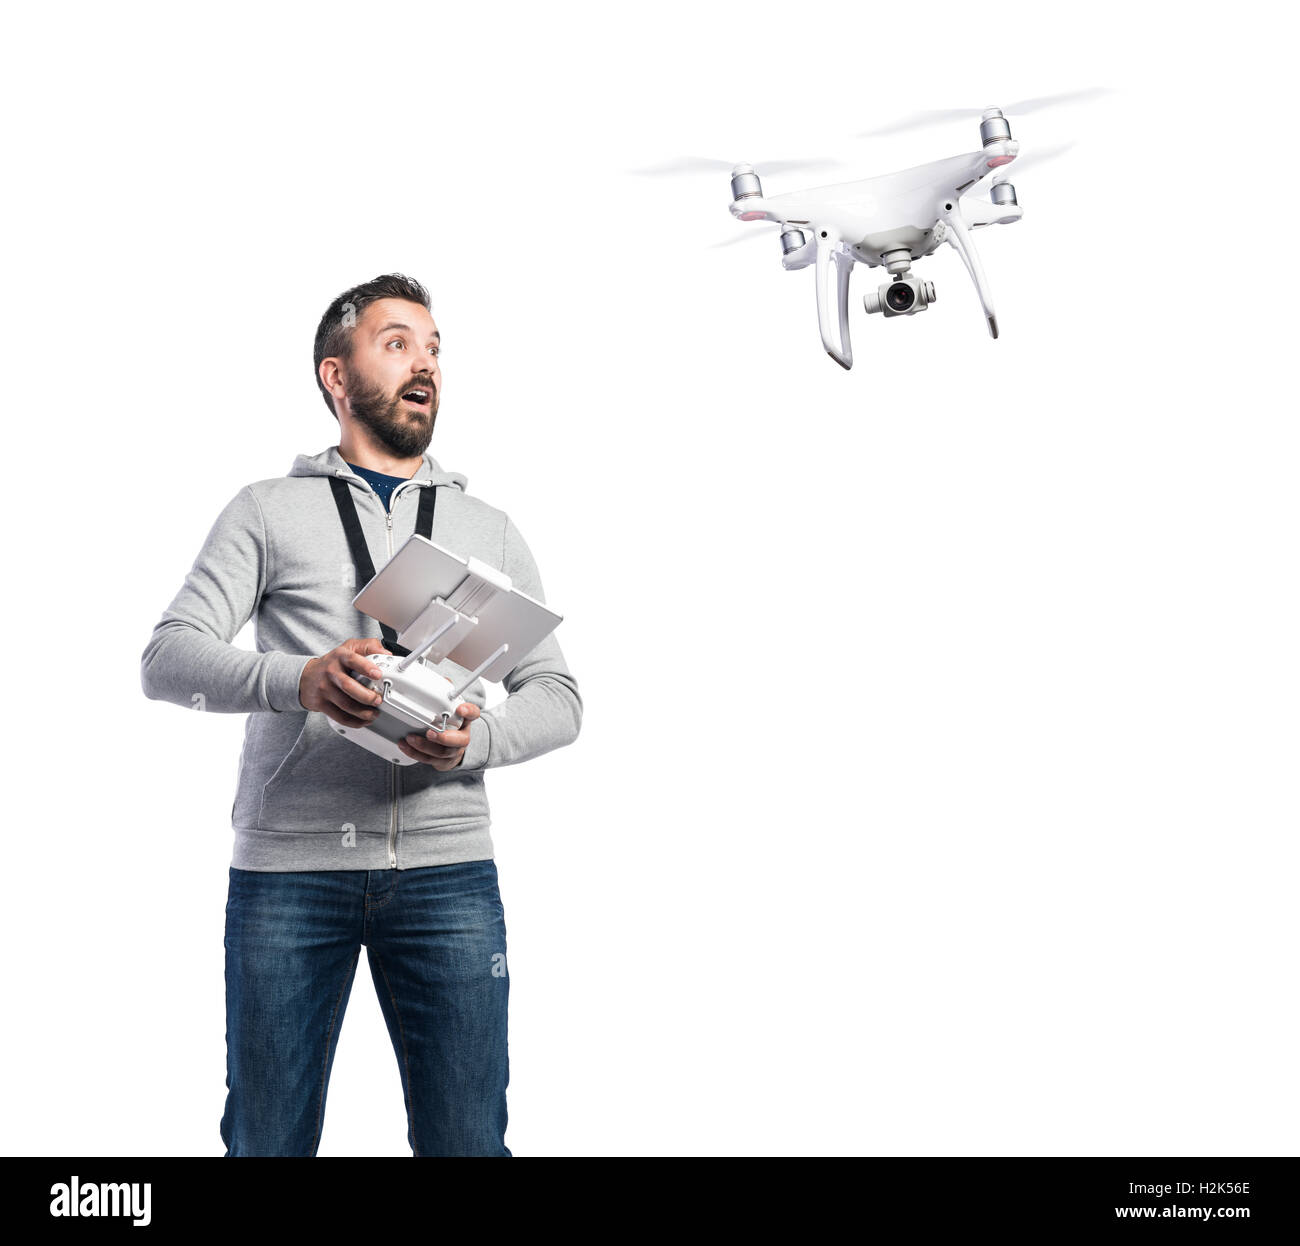 Man with flying drone. Studio shot on white background, isolated Stock  Photo - Alamy